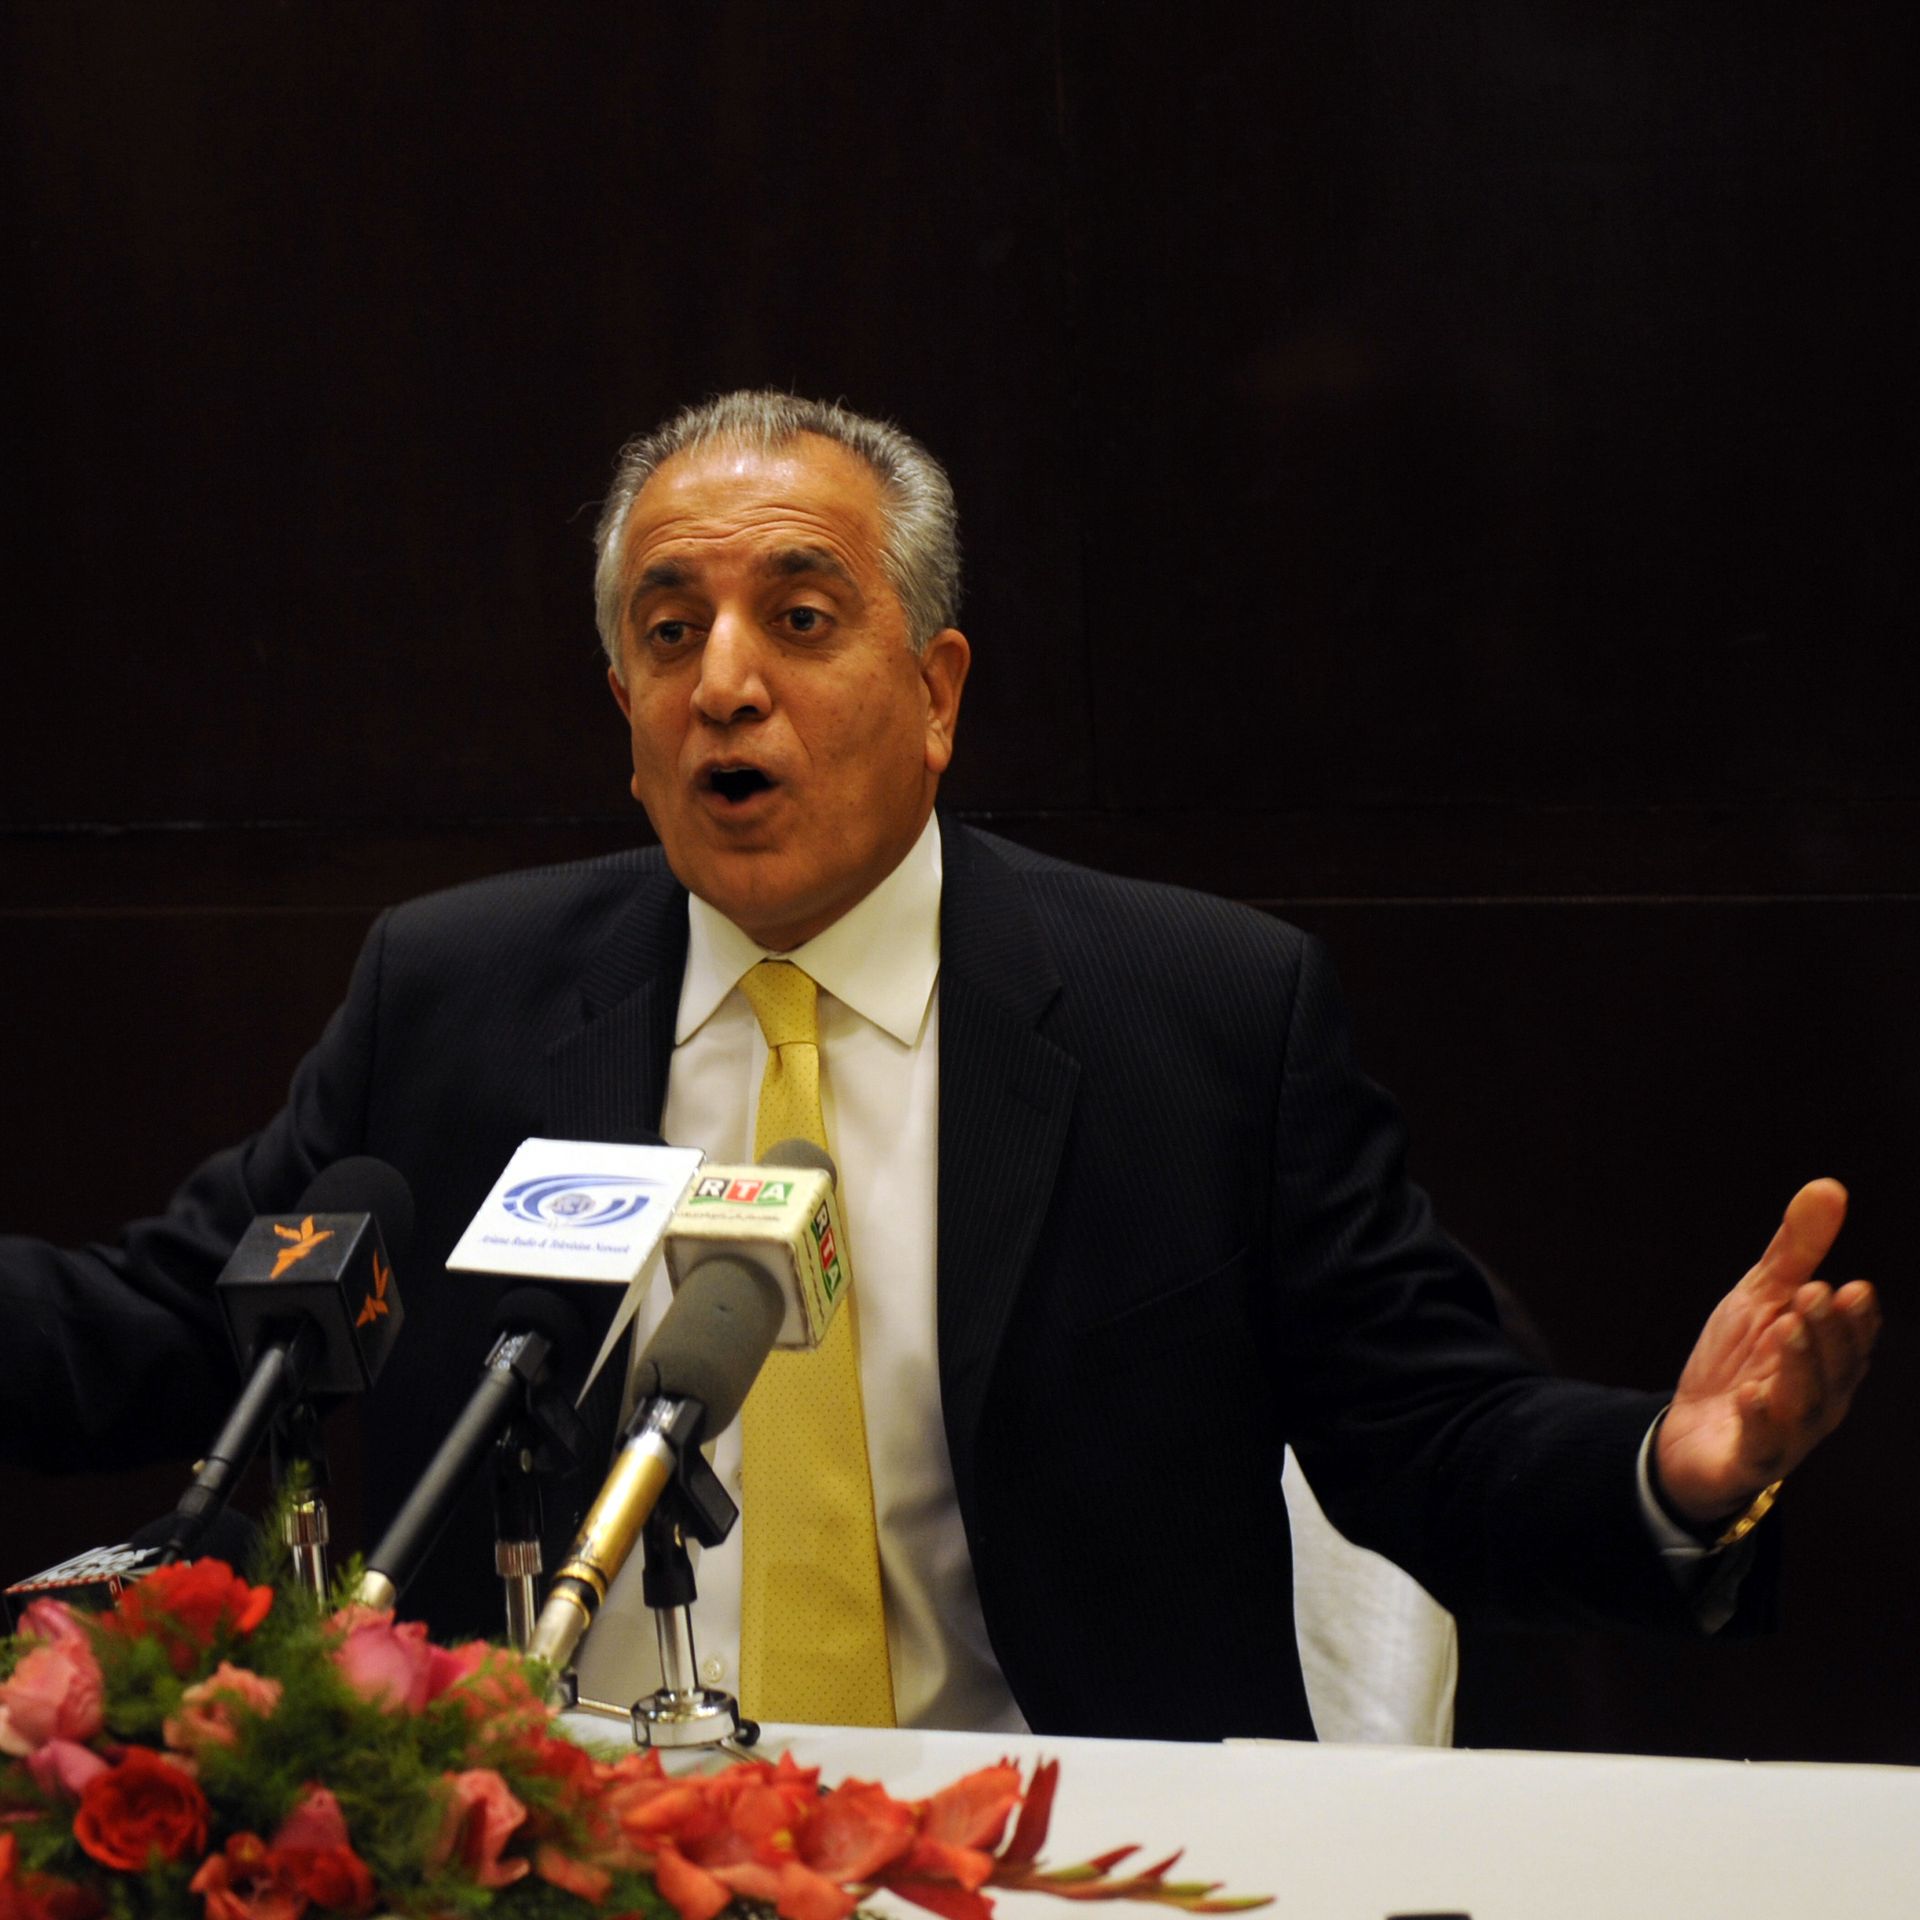 Zalmay Khalilzad speaks and gestures from a table with mics